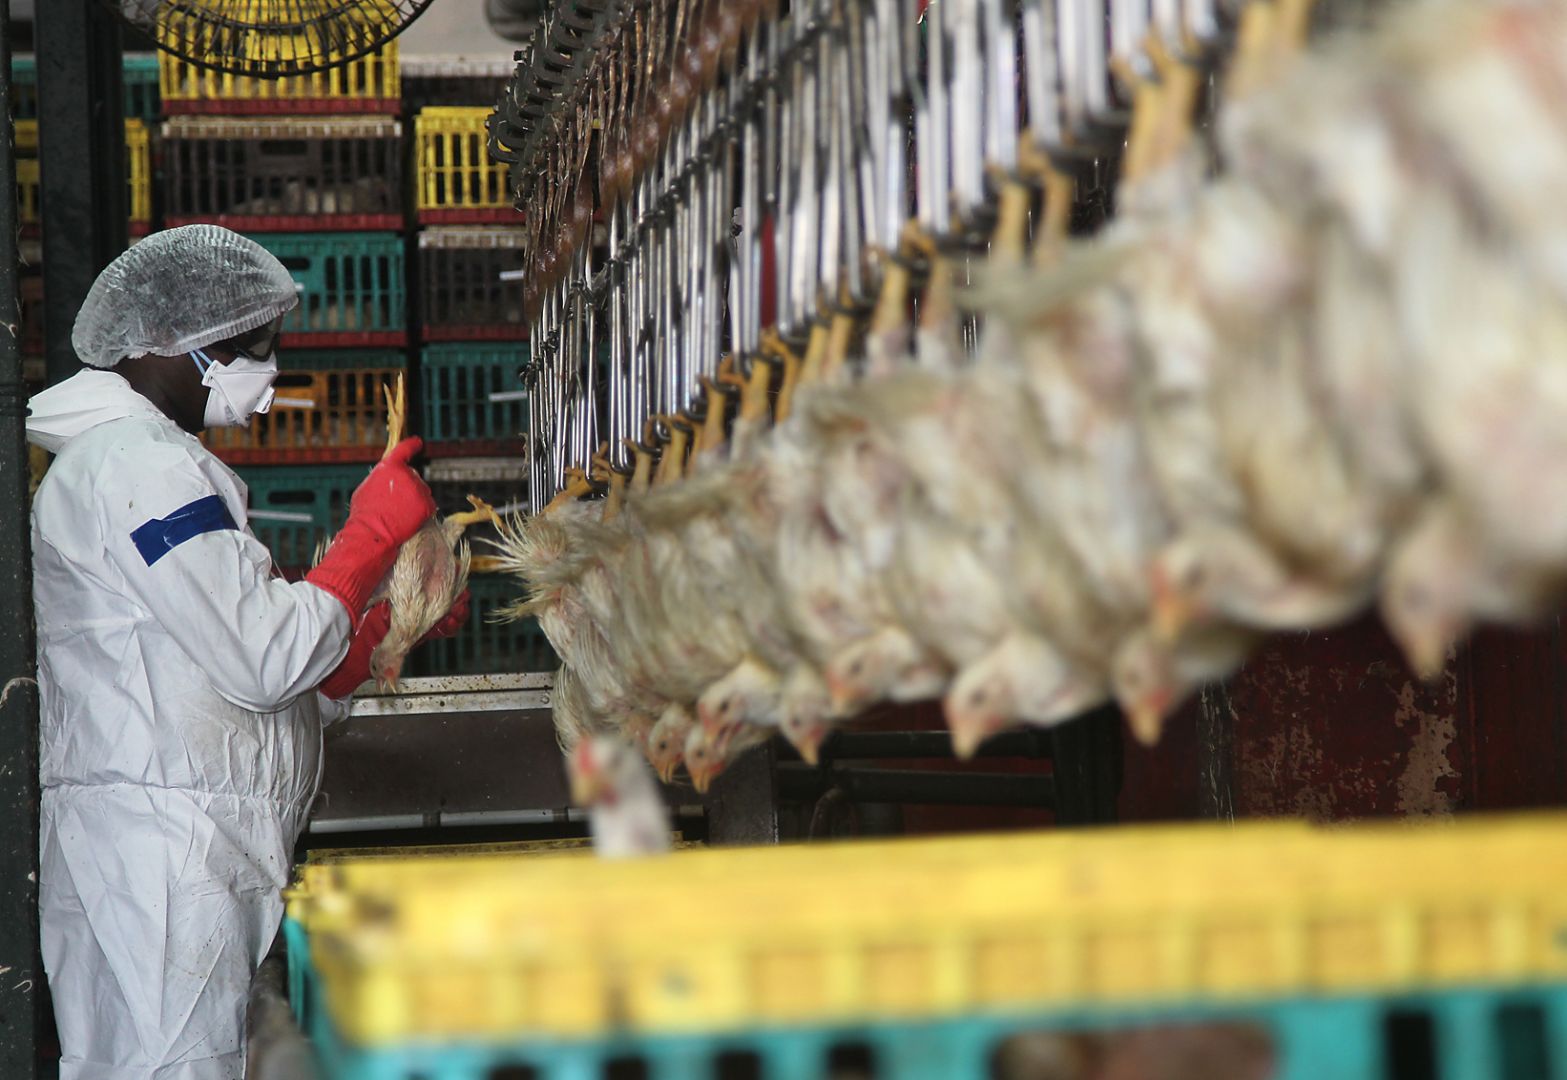 The Poultry Industry Treats Workers Like Disposable Commodities